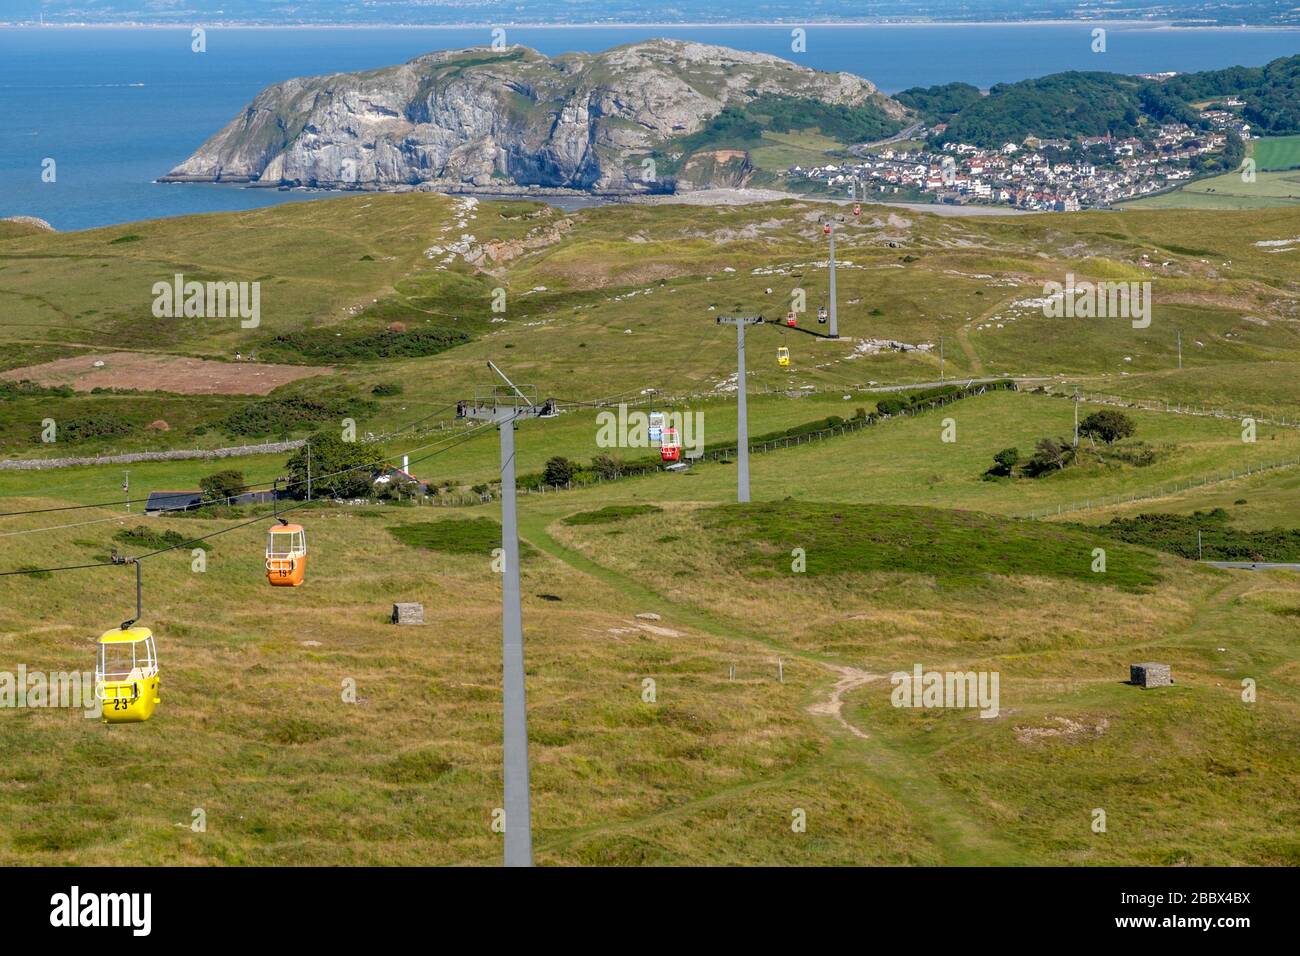 Llandudno cable cars ascending the Great Orme in the seaside resort of Llandudno in Conwy County Borough, Wales. The longest cable car in Britain. Stock Photo